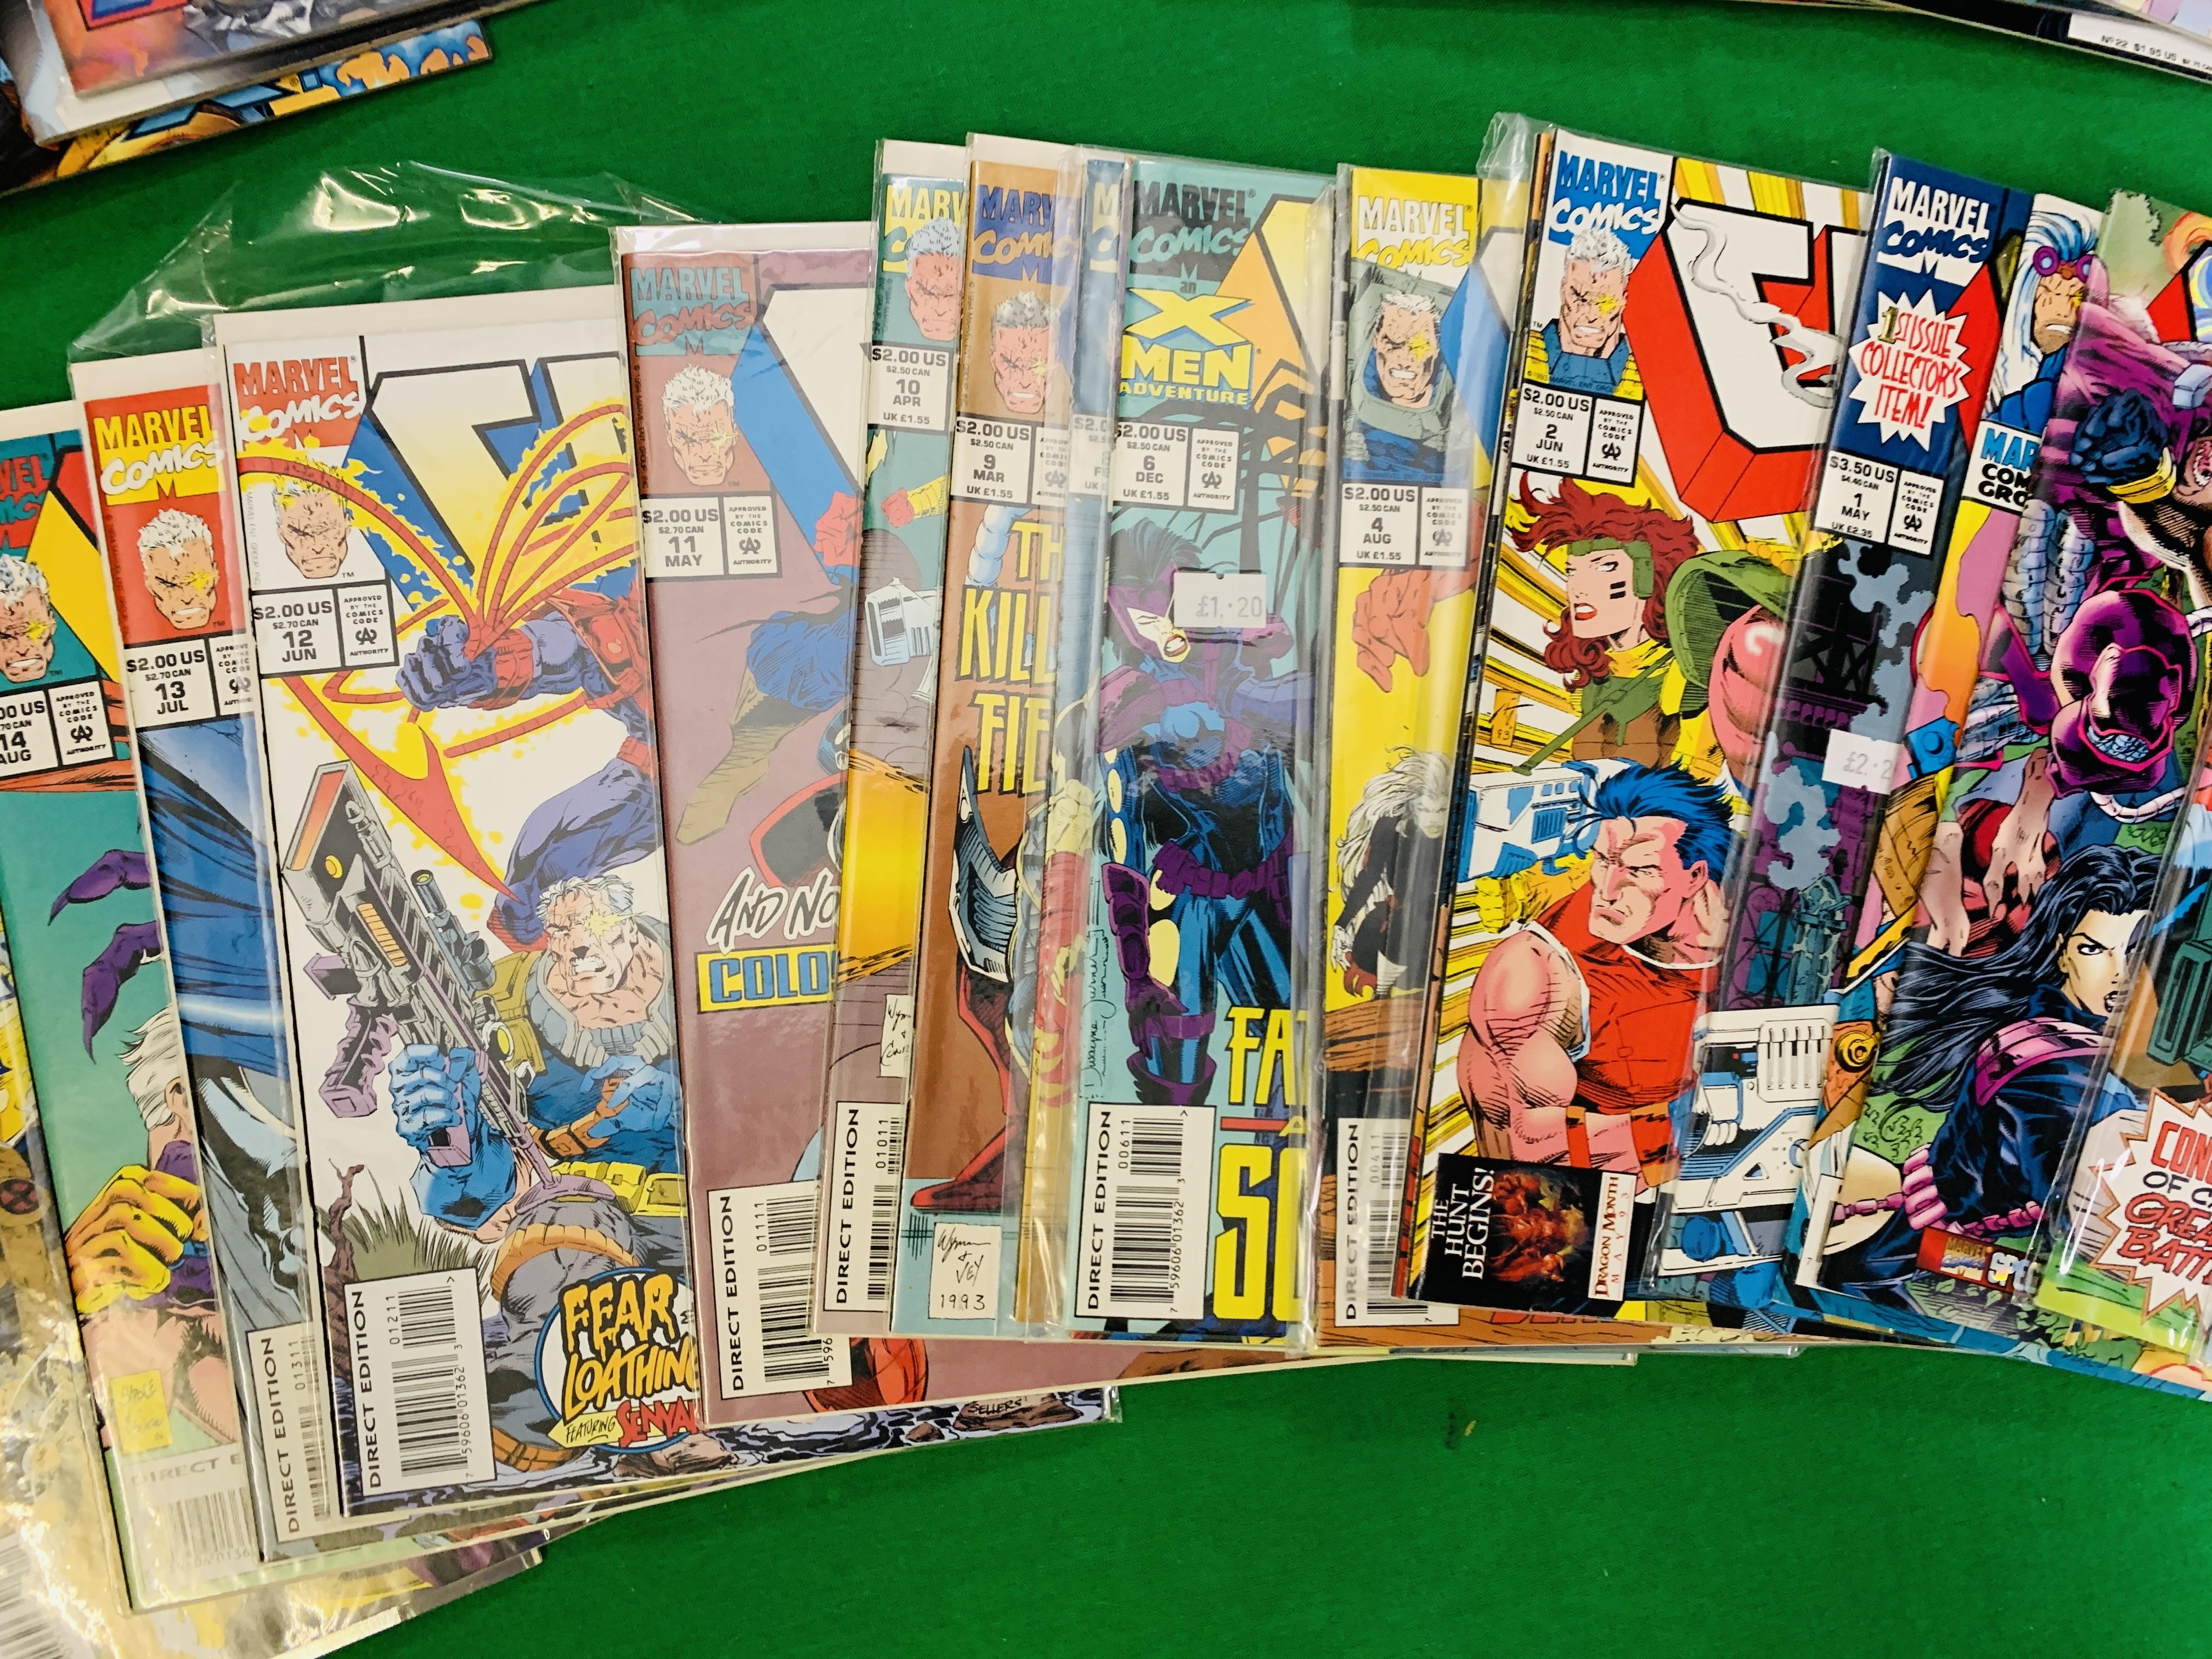 MARVEL COMICS CABLE NO. 1 - 40 FROM 1993. MISSING NO. 25. LIMITED RUN PLUS FLASHBACK. NO. - Image 4 of 7